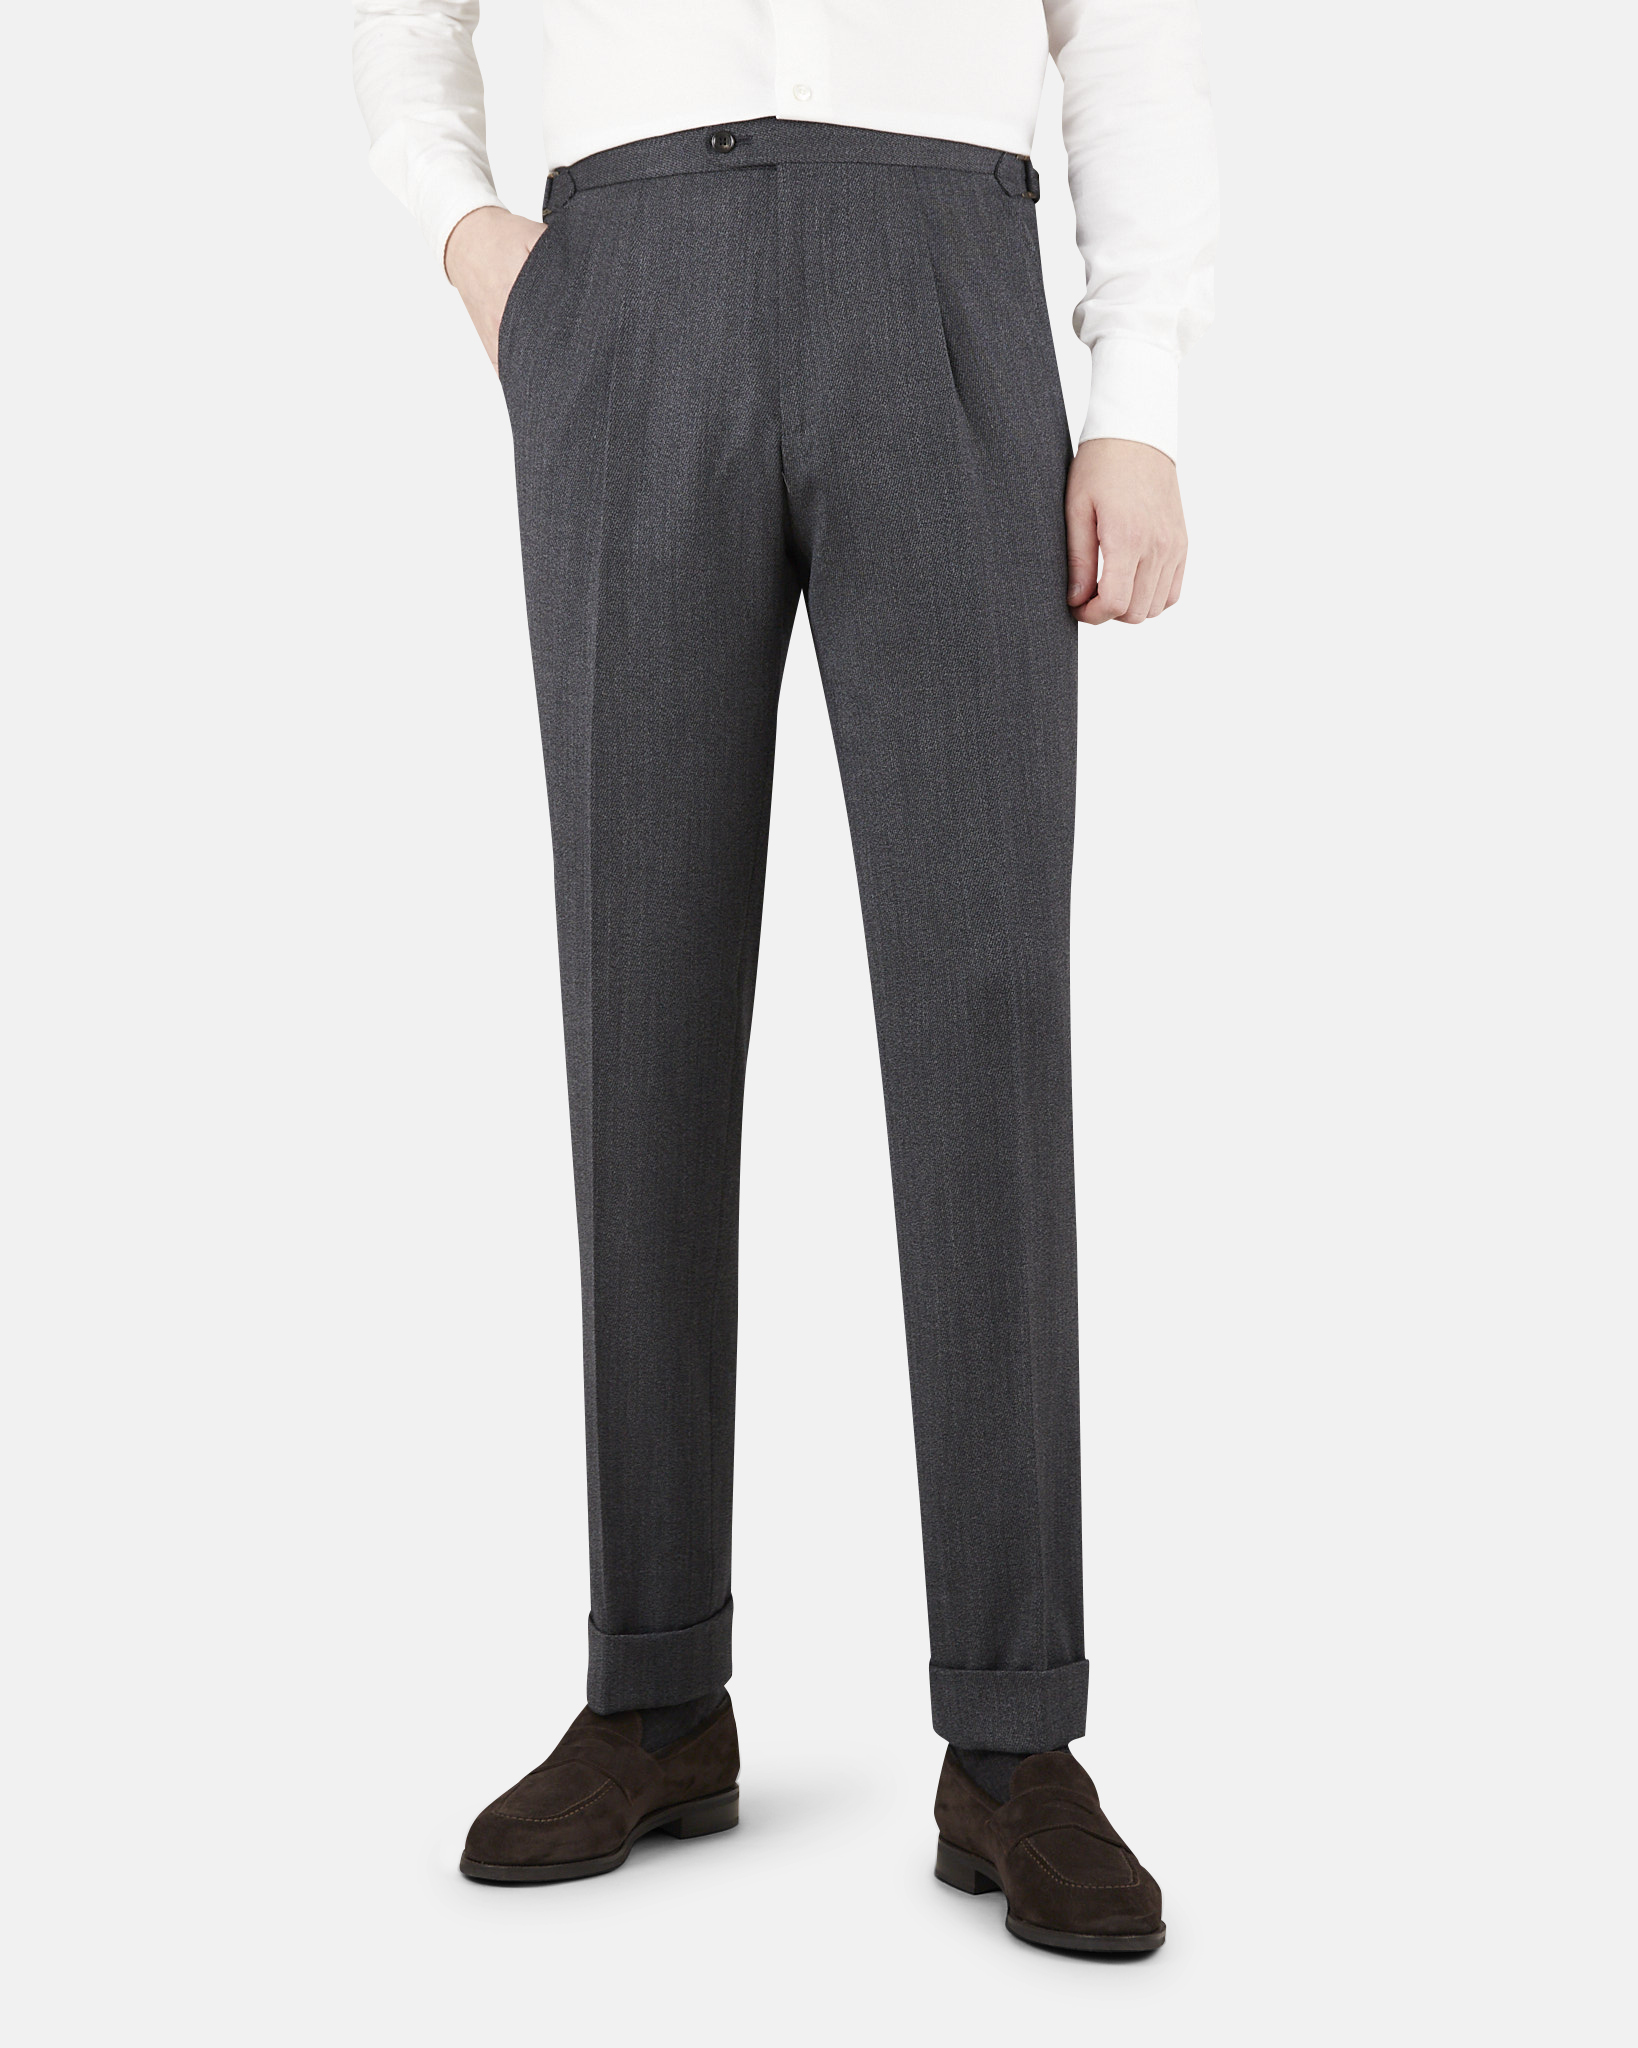 Mod 2 Single Pleat And Side Adjuster Whipcord Trousers